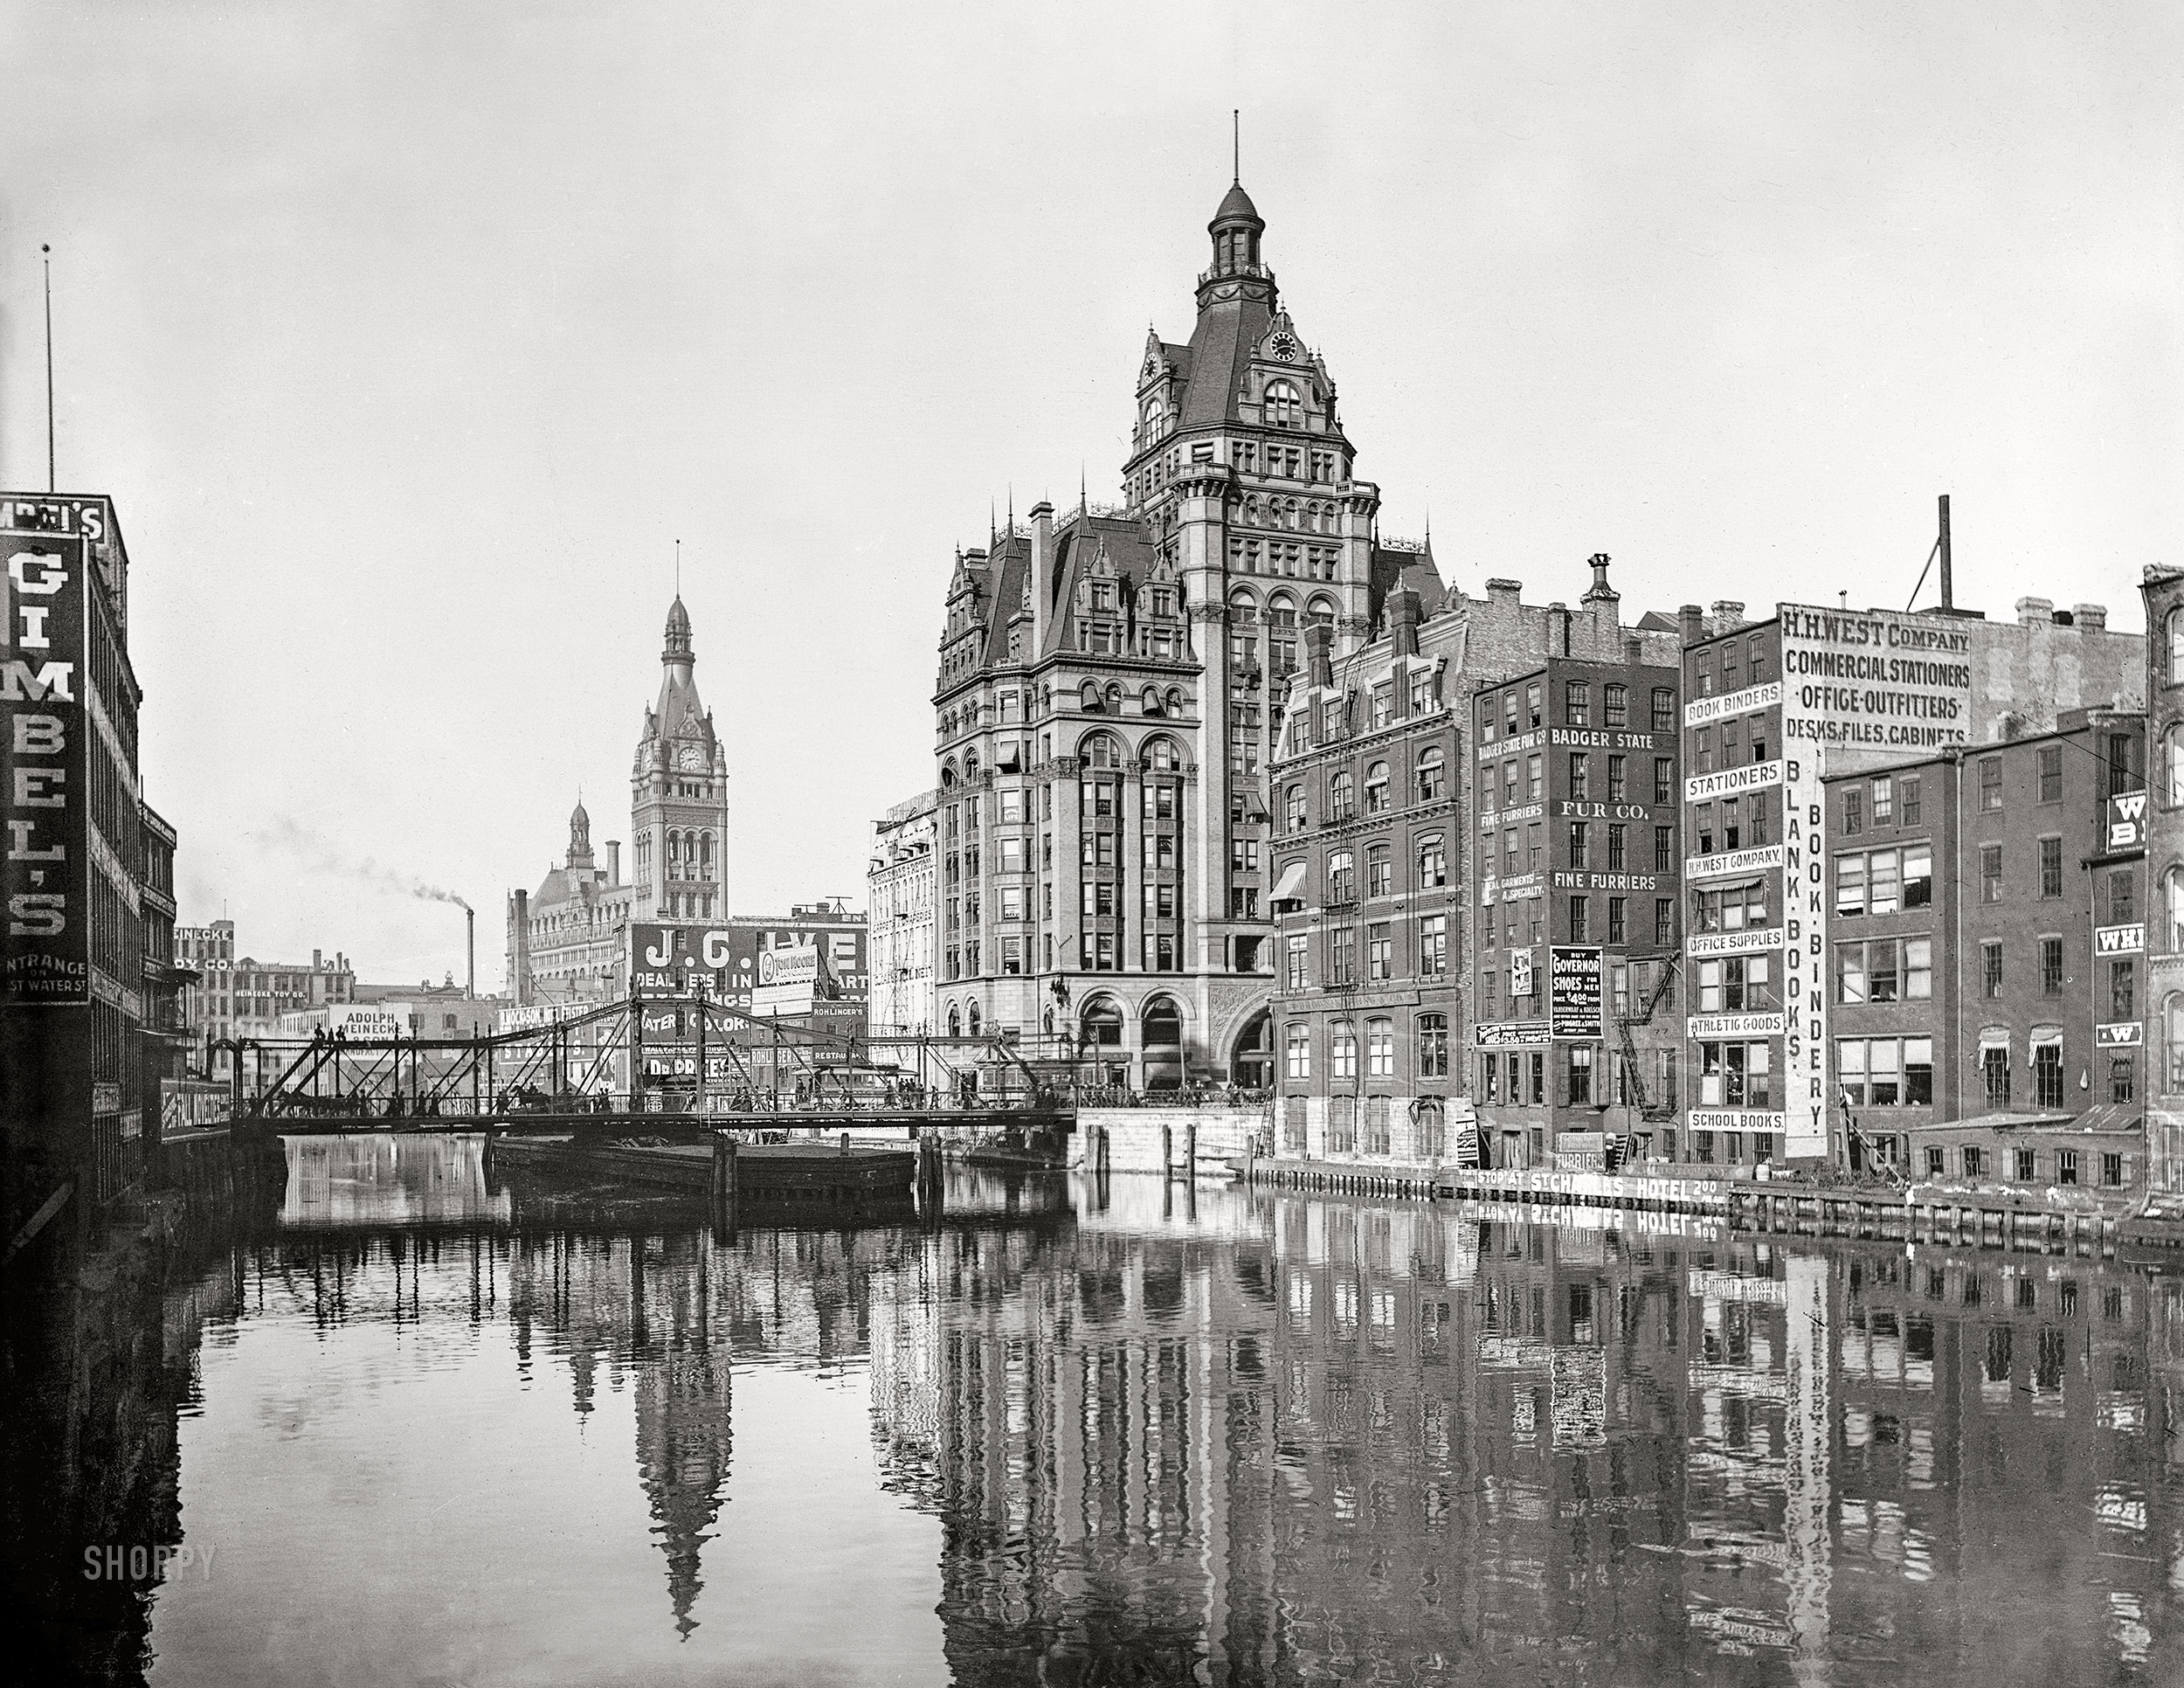 Milwaukee circa 1901. "The river from Sycamore Street." Lofty landmarks notwithstanding, our favorite building here bears the name of the Meinecke Toy Company. With Badger State Fur a close runner-up. 8x10 inch glass negative, Detroit Photographic Co. View full size.